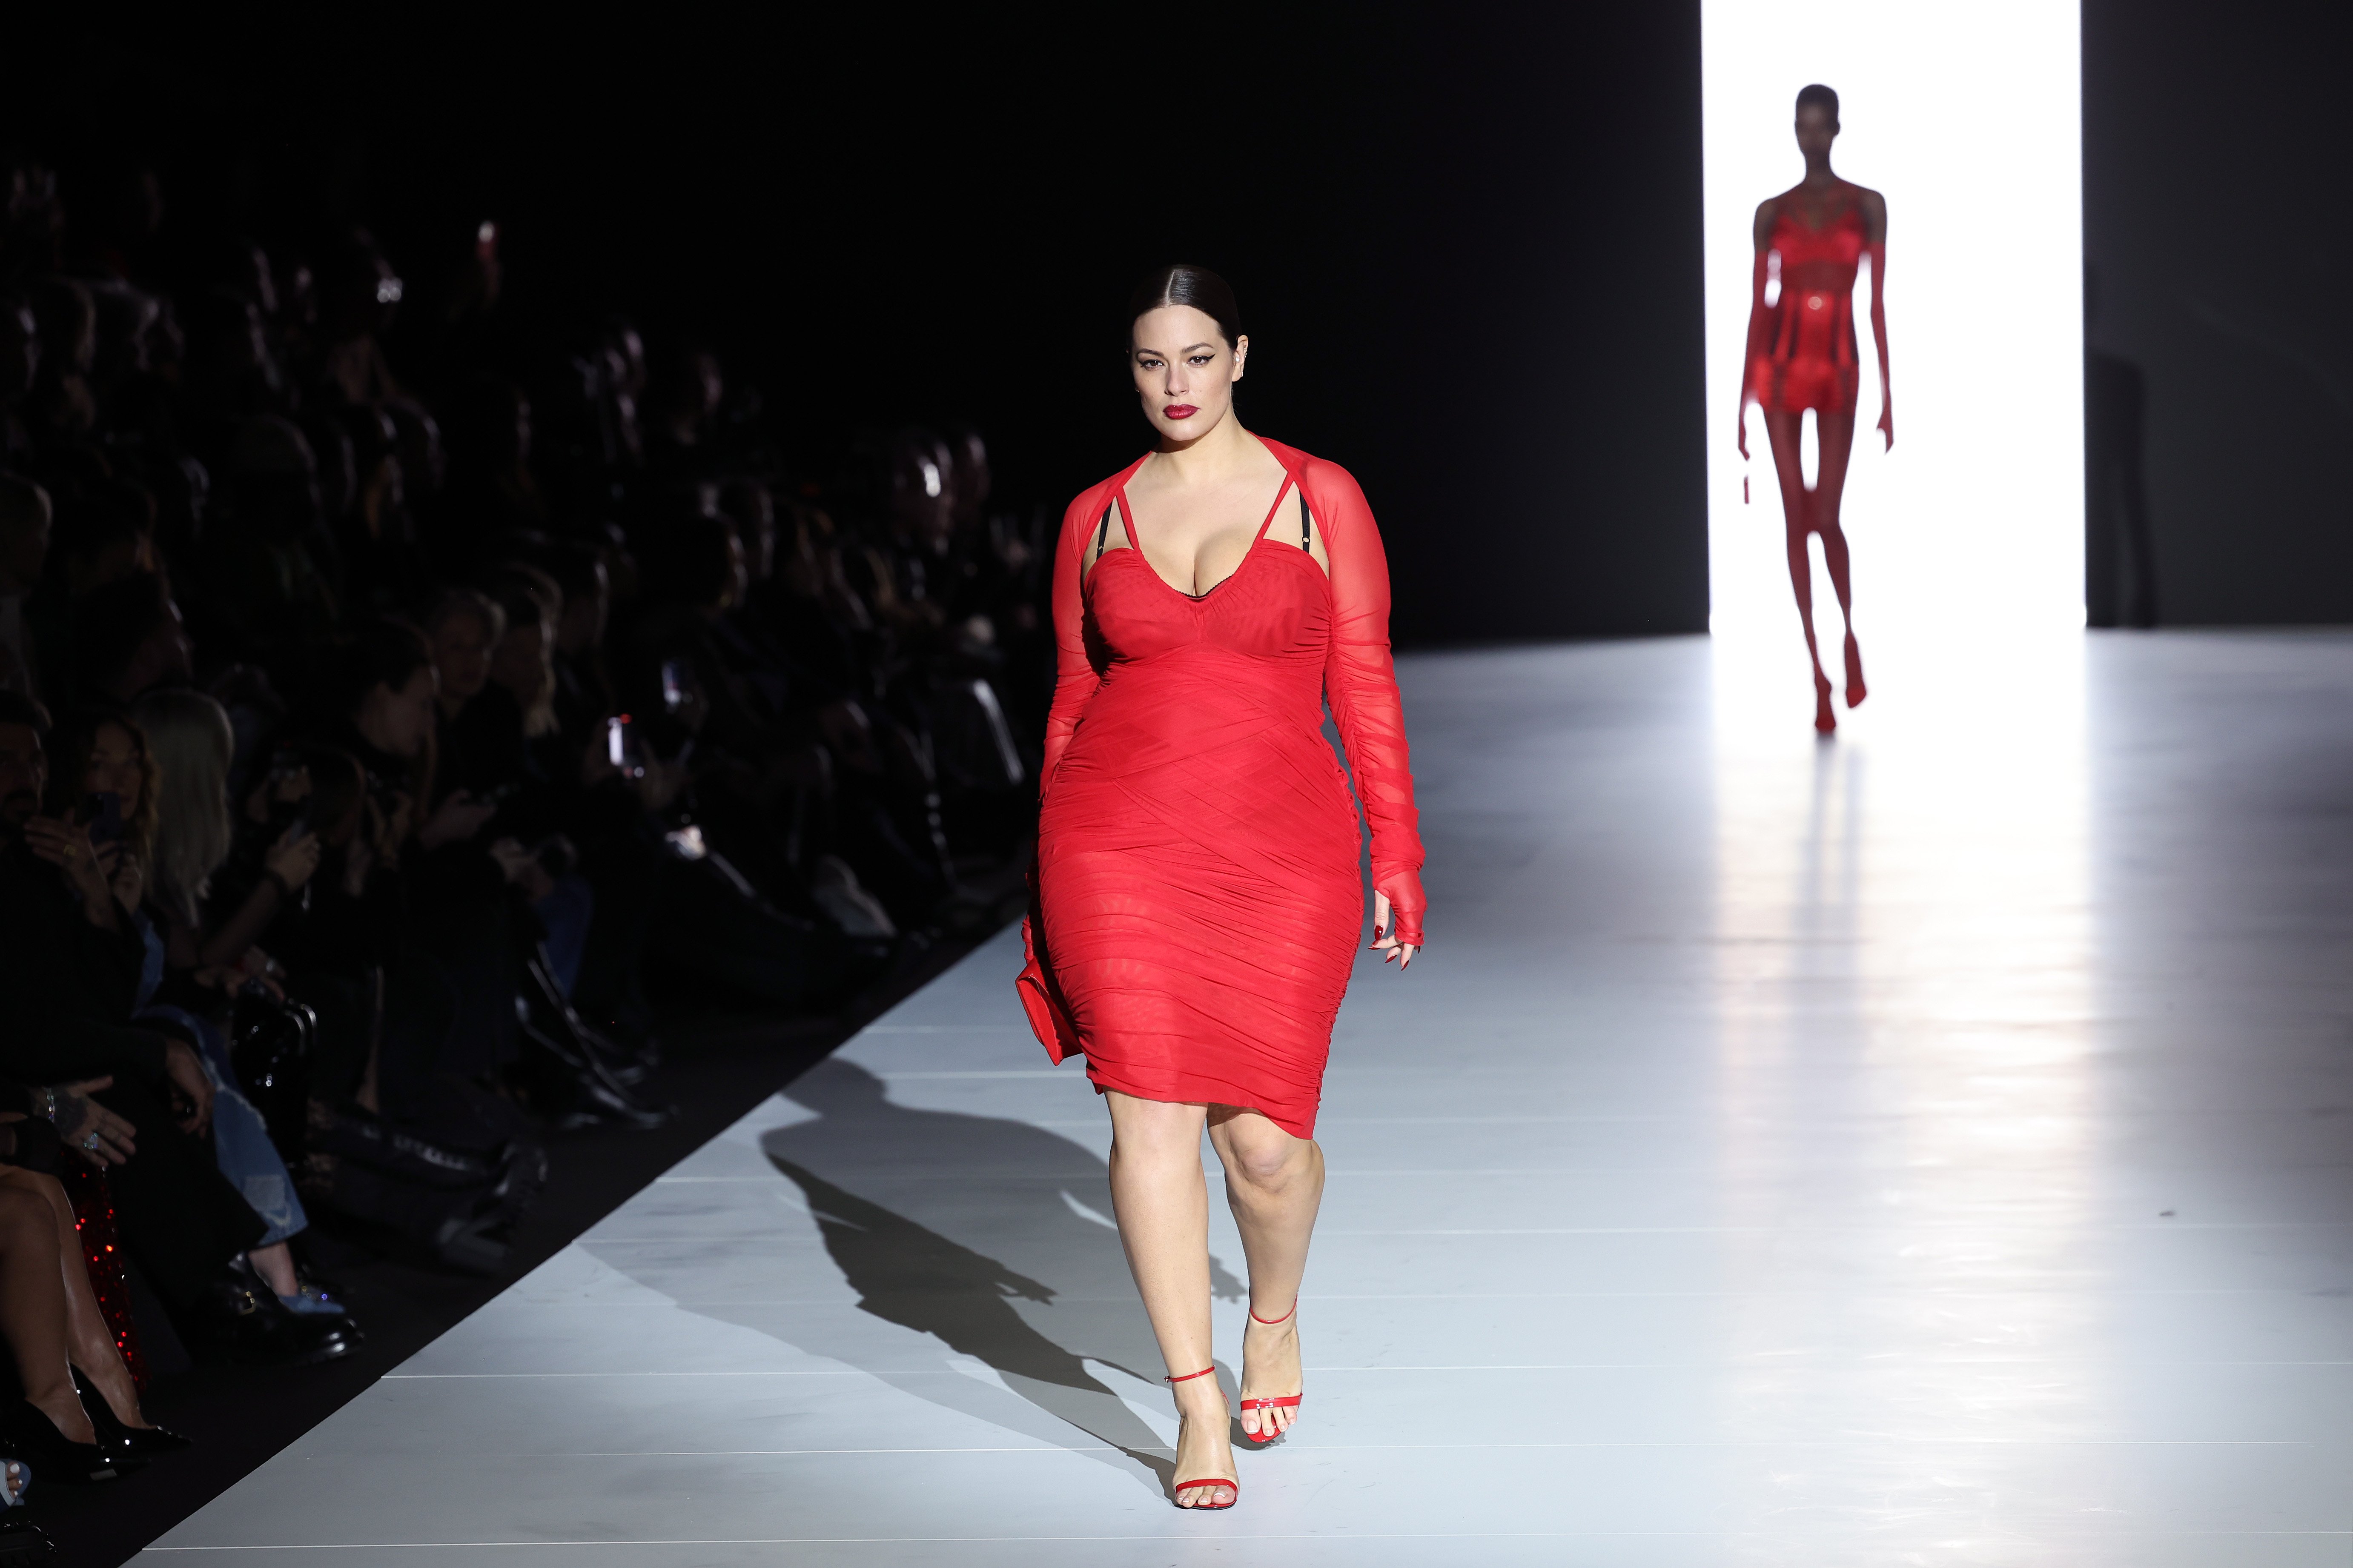 Ashley Graham walks the runway at the Dolce & Gabbana fashion at the Milan Fashion Week Womenswear Fall/Winter on February 25, 2023 in Milan, Italy. | Source: Getty Images